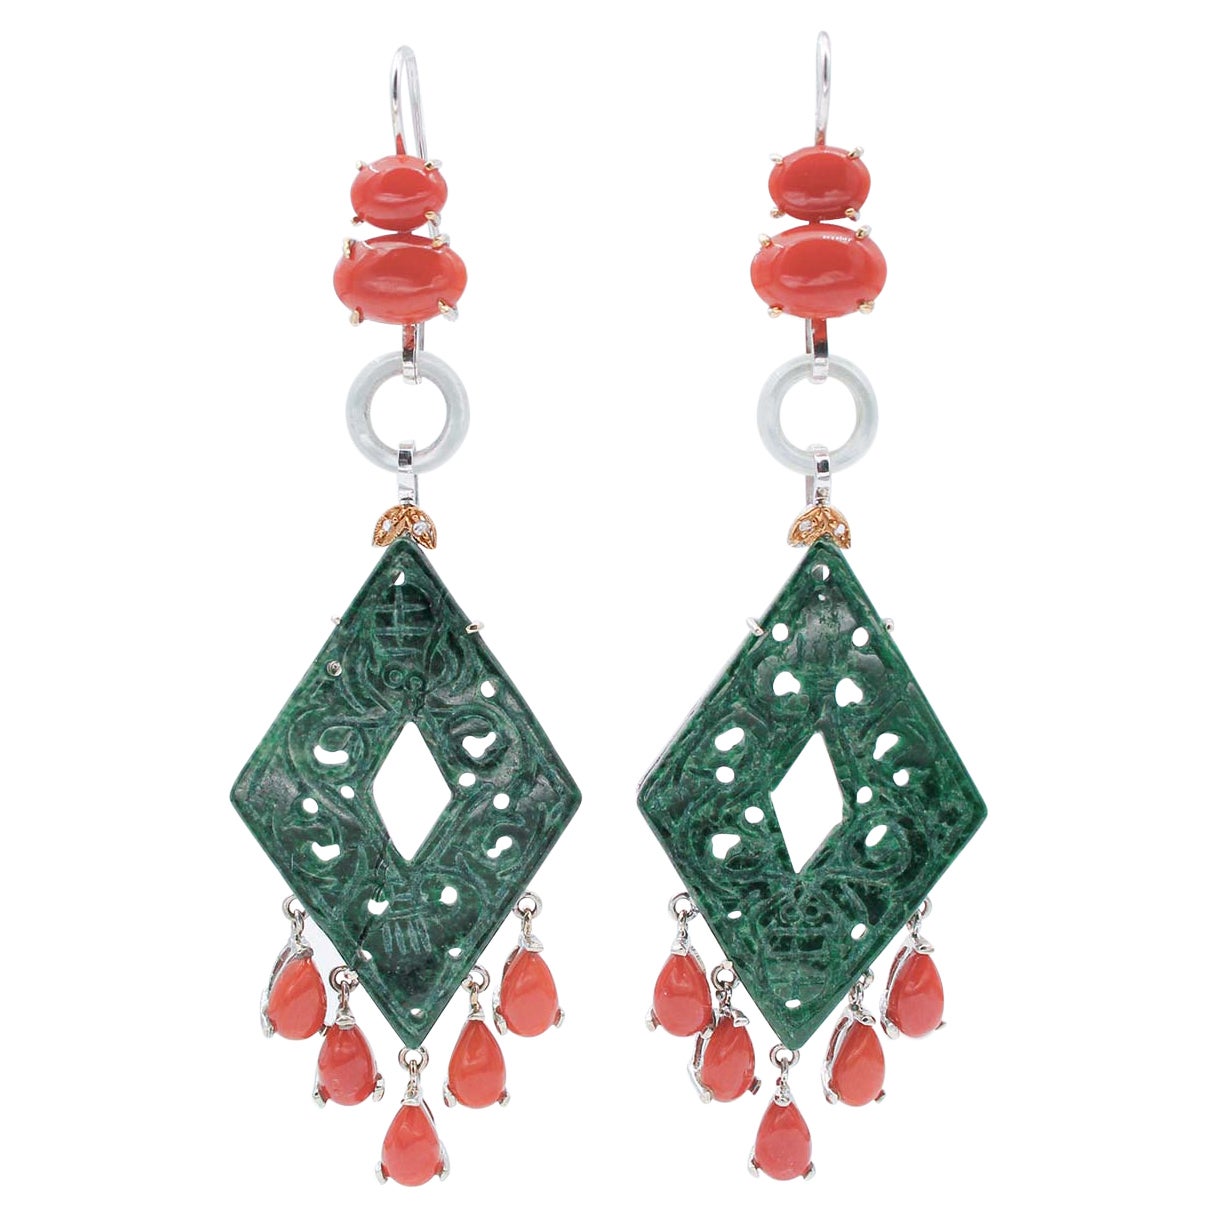 Corals, Green Stones, White Stones, Diamonds, 14 Kt White and Rose Gold Earrings